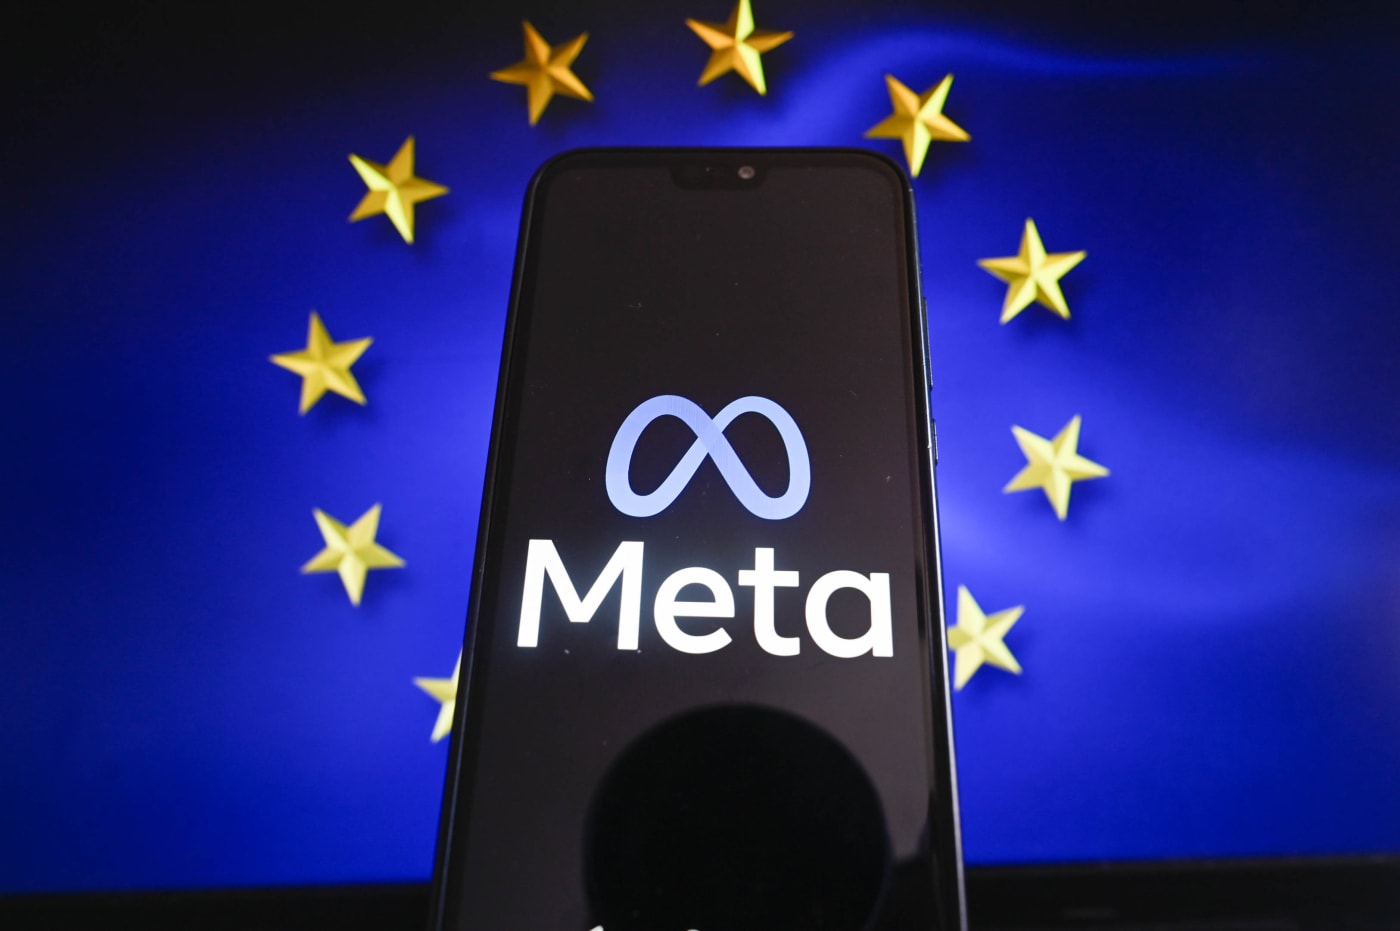 The European Union will reportedly open a new investigation into Meta over election policies